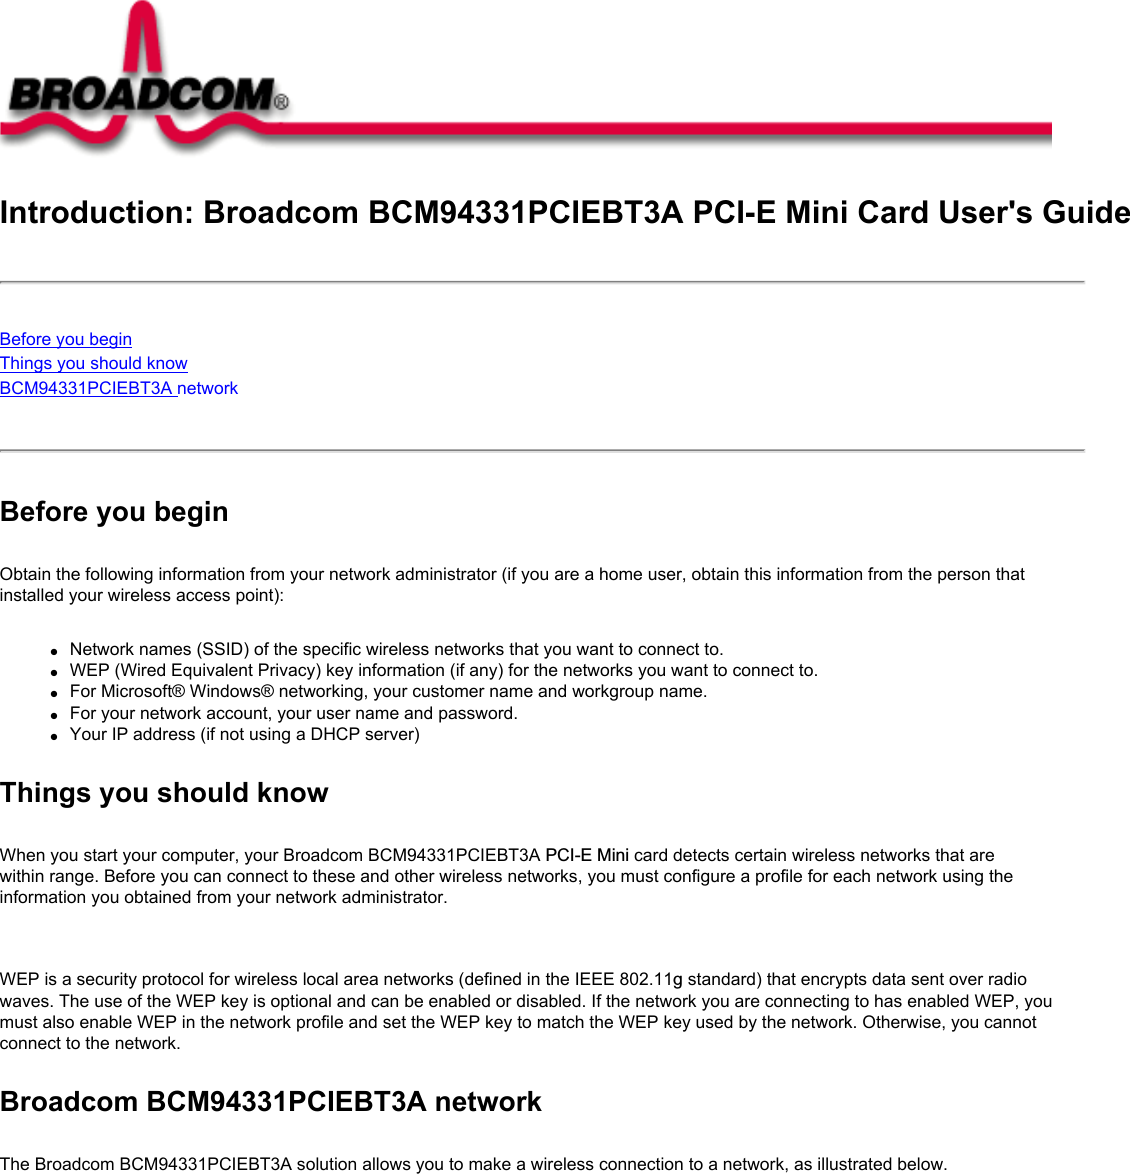 Introduction: Broadcom BCM94331PCIEBT3A PCI-E Mini Card User&apos;s GuideBefore you beginThings you should knowBCM94331PCIEBT3A network Before you beginObtain the following information from your network administrator (if you are a home user, obtain this information from the person that installed your wireless access point):●     Network names (SSID) of the specific wireless networks that you want to connect to.●     WEP (Wired Equivalent Privacy) key information (if any) for the networks you want to connect to.●     For Microsoft® Windows® networking, your customer name and workgroup name.●     For your network account, your user name and password.●     Your IP address (if not using a DHCP server)Things you should knowWhen you start your computer, your Broadcom BCM94331PCIEBT3A PCI-E Mini card detects certain wireless networks that are within range. Before you can connect to these and other wireless networks, you must configure a profile for each network using the information you obtained from your network administrator.   WEP is a security protocol for wireless local area networks (defined in the IEEE 802.11g standard) that encrypts data sent over radio waves. The use of the WEP key is optional and can be enabled or disabled. If the network you are connecting to has enabled WEP, you must also enable WEP in the network profile and set the WEP key to match the WEP key used by the network. Otherwise, you cannot connect to the network.Broadcom BCM94331PCIEBT3A networkThe Broadcom BCM94331PCIEBT3A solution allows you to make a wireless connection to a network, as illustrated below.